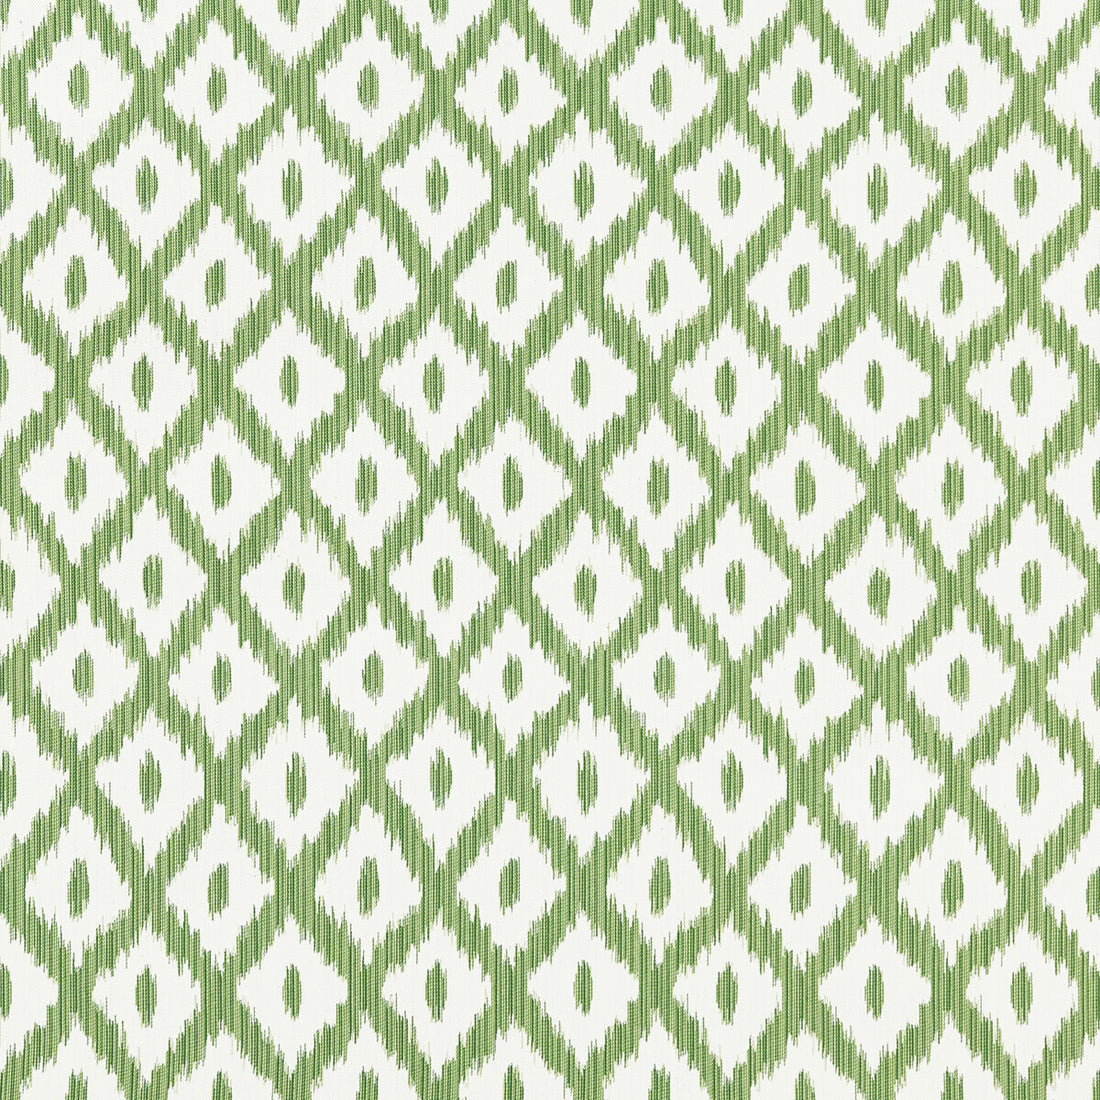 Pitigala fabric in green color - pattern 35762.13.0 - by Kravet Basics in the Ceylon collection